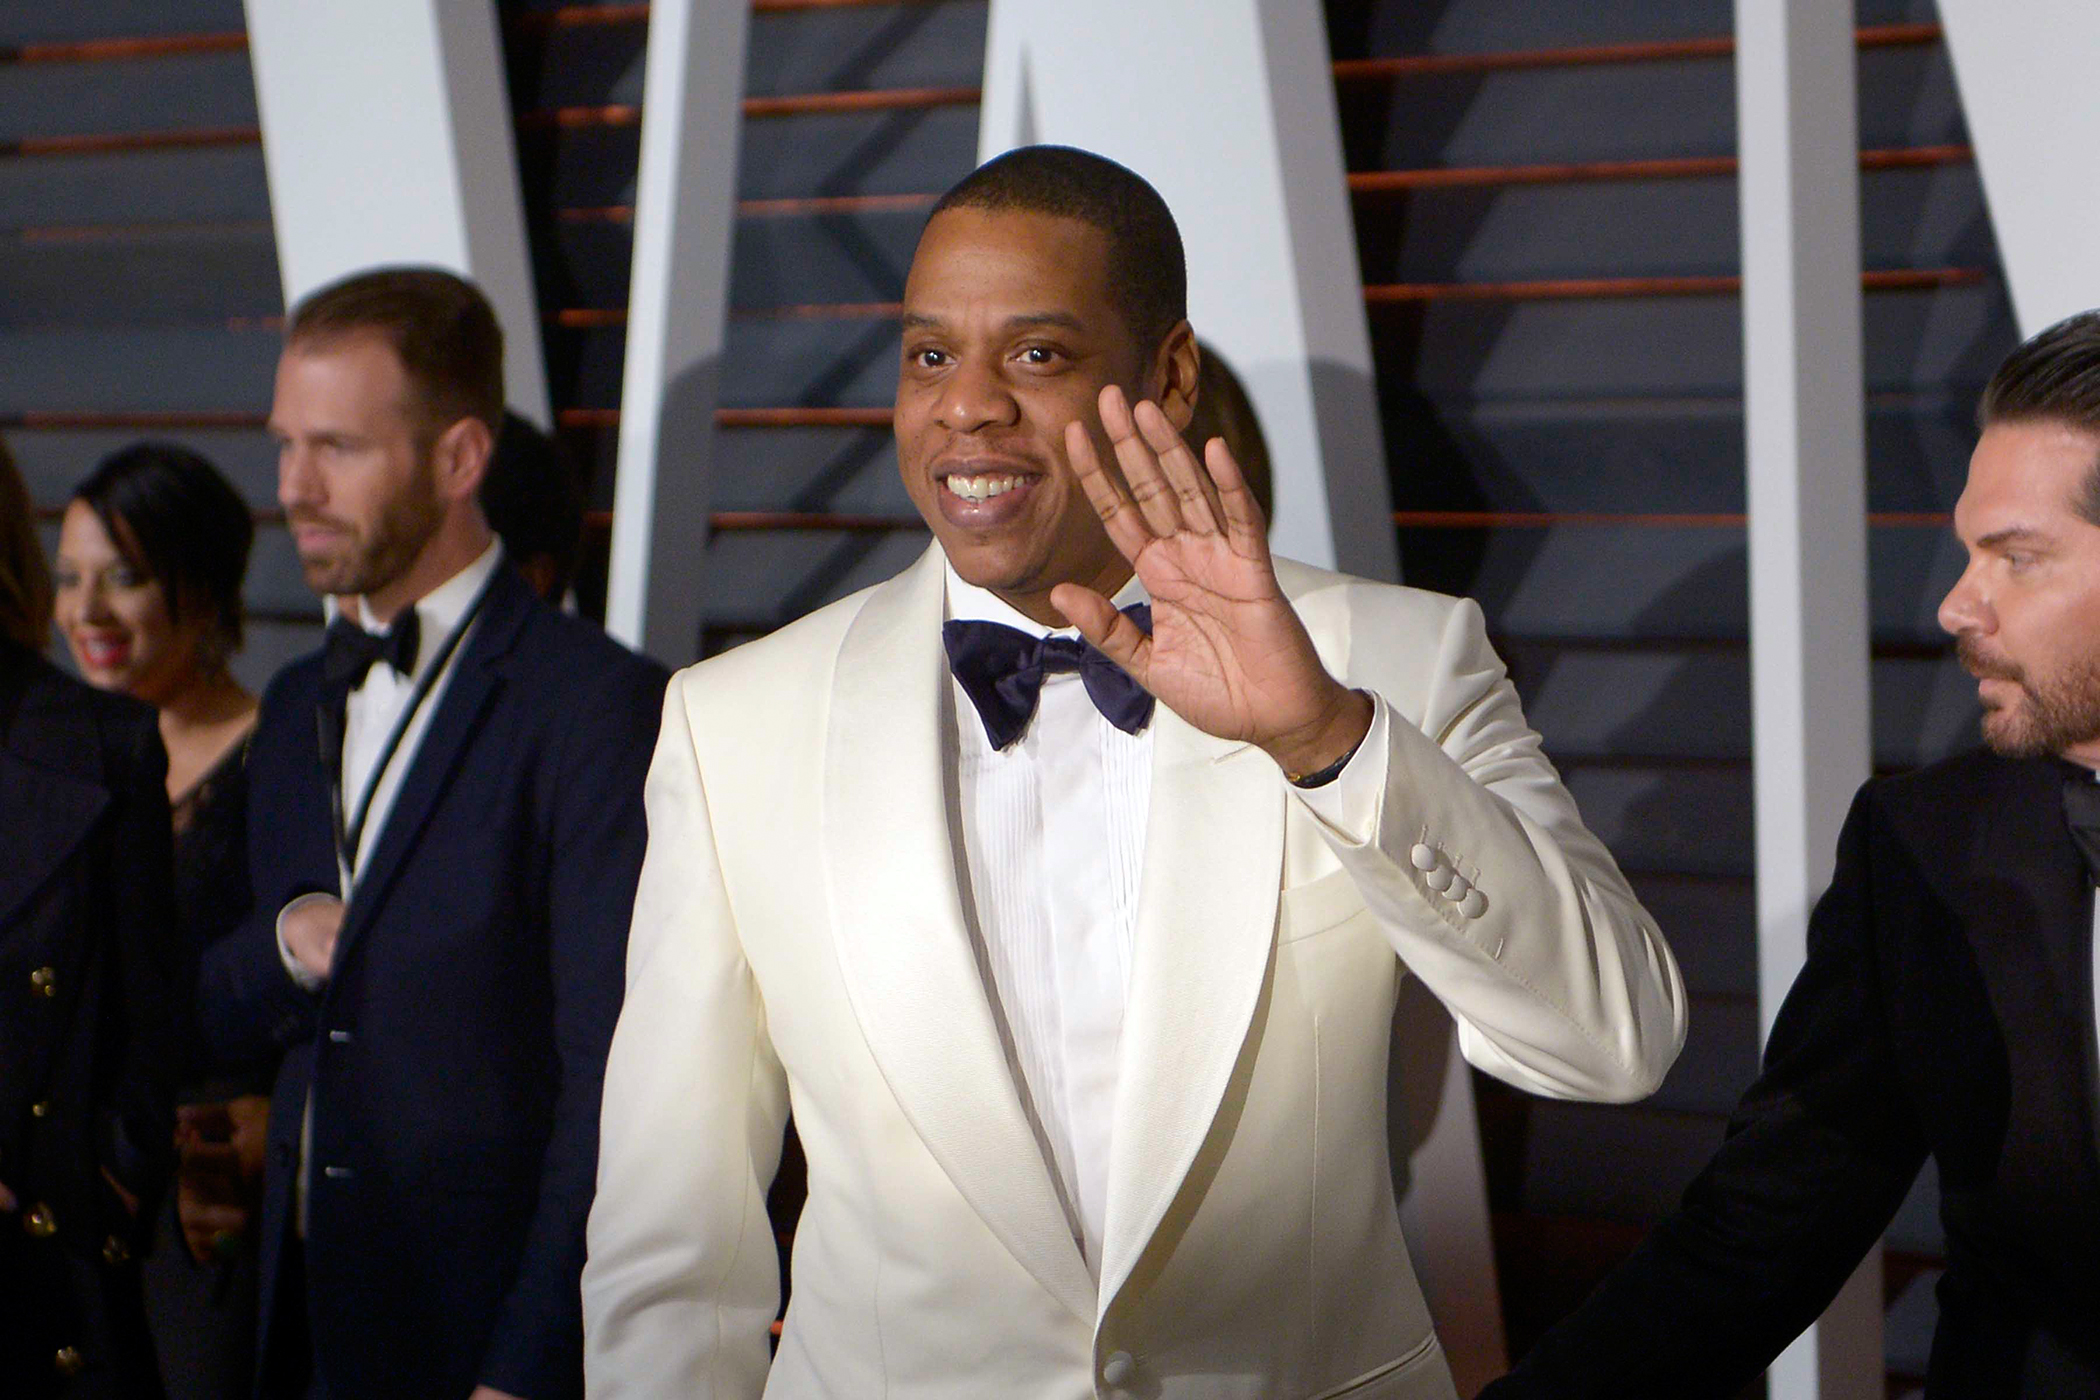 Jay-Z at the 2015 VANITY FAIR Oscar Party held at Wallis Annenberg Center for the Performing Arts, Beverly Hills, CA, on February 22, 2015.